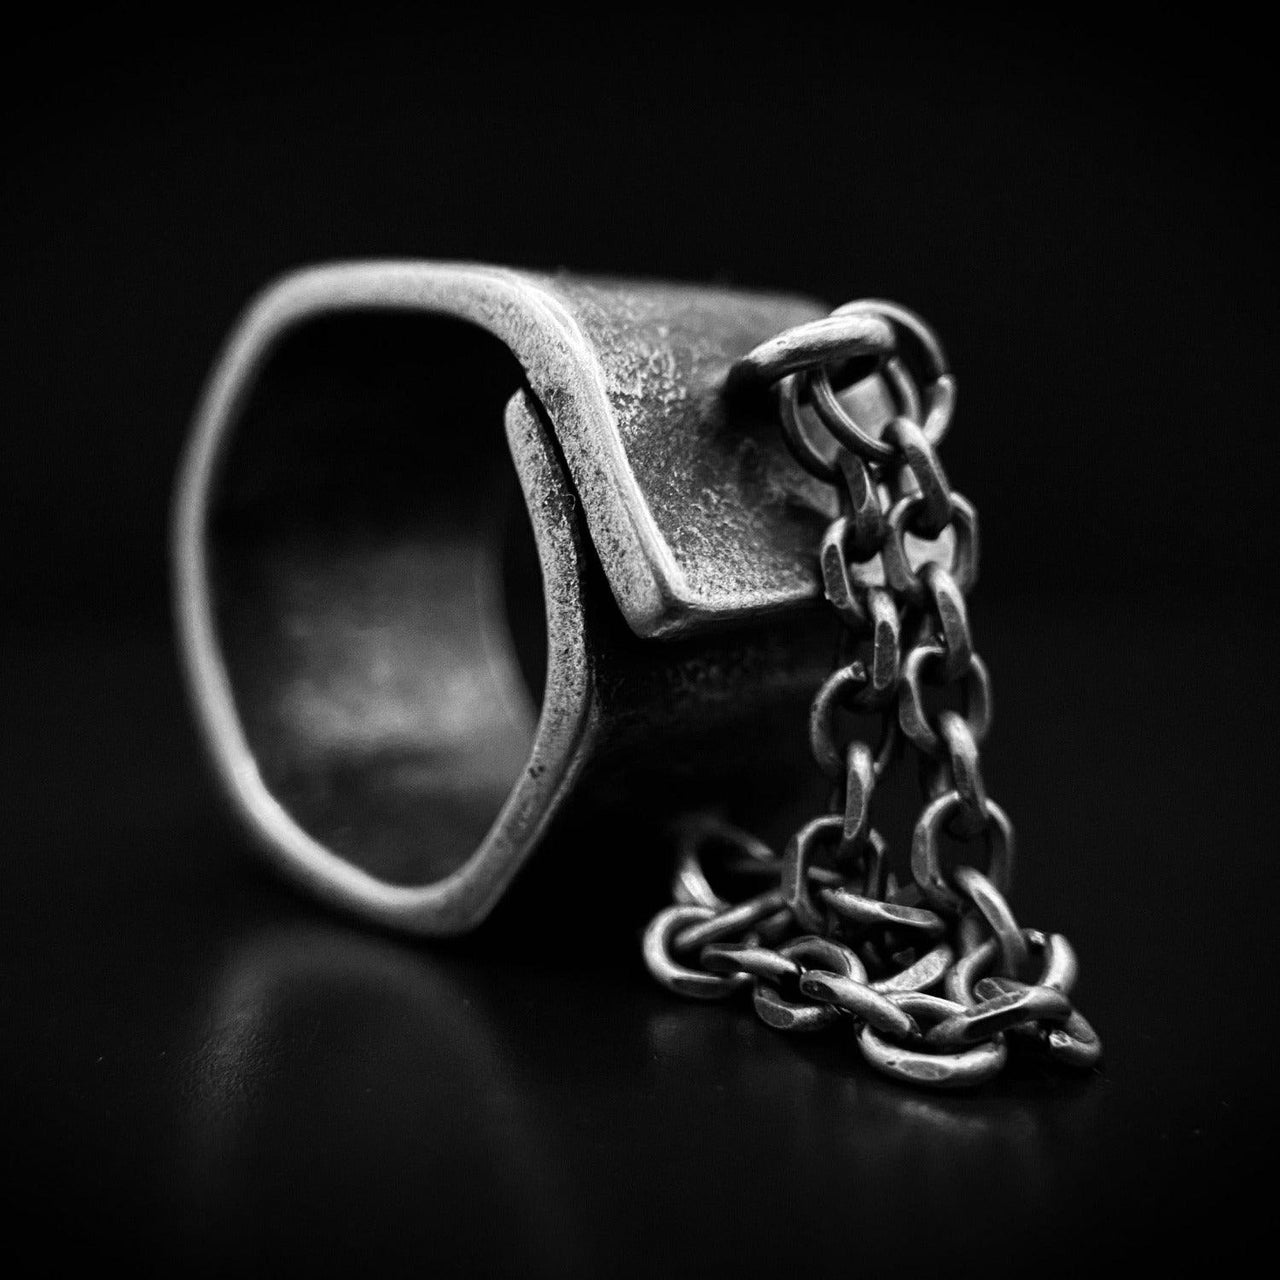 Stainless Steel Chunky Industrial Chain Ring - Black Feather Design